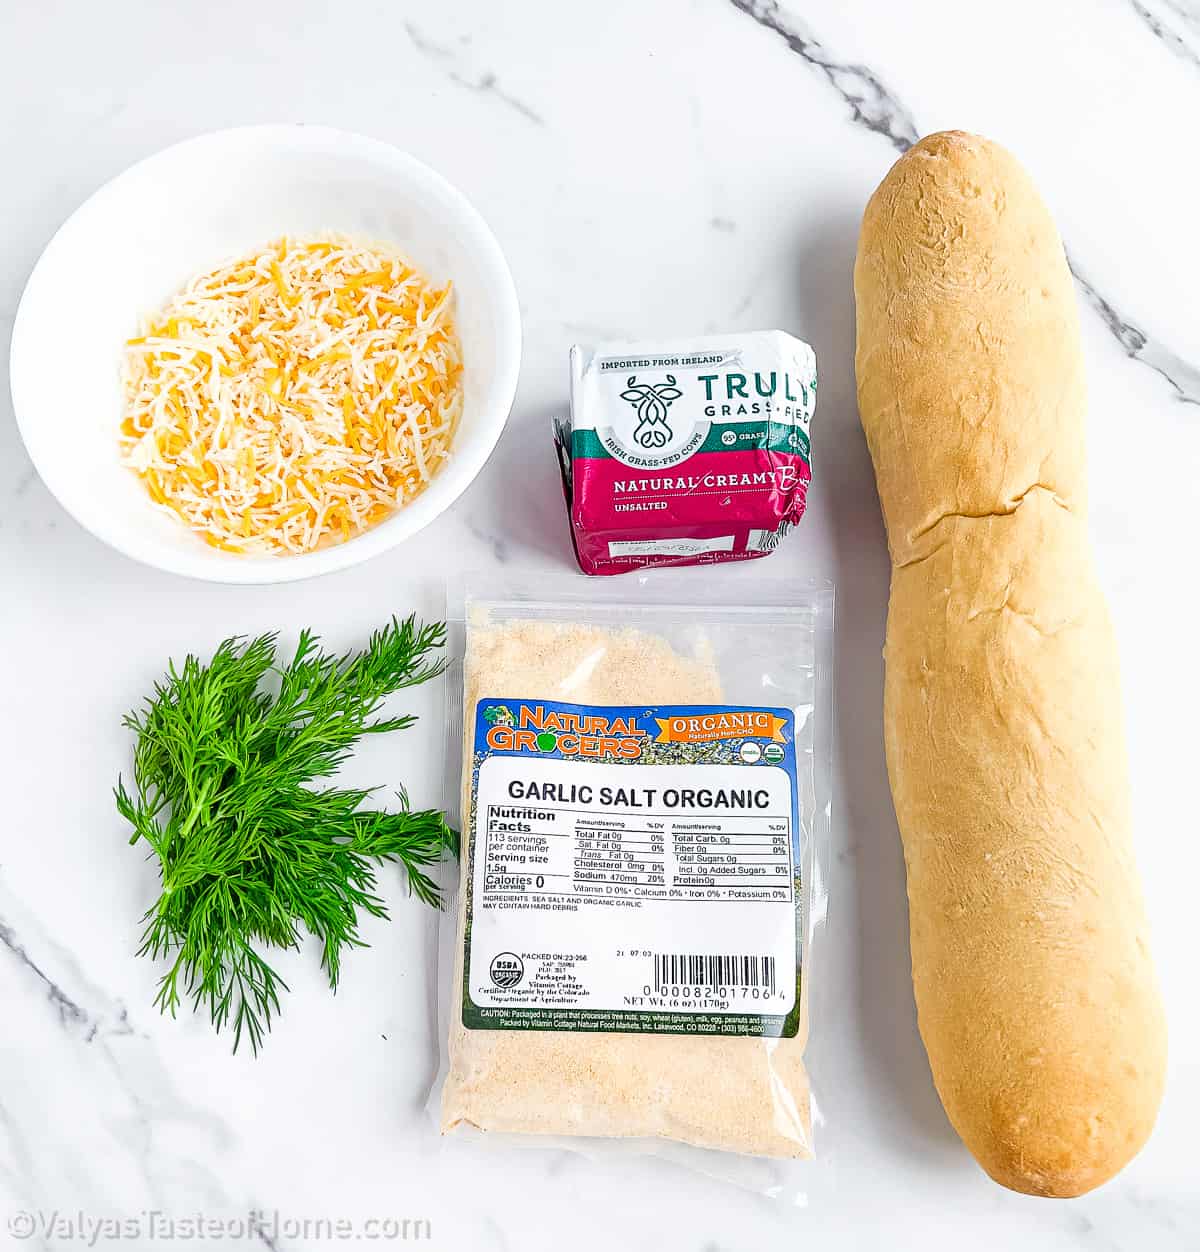 All you need are some simple pantry staple ingredients to make this cheesy garlic bread recipe at home.